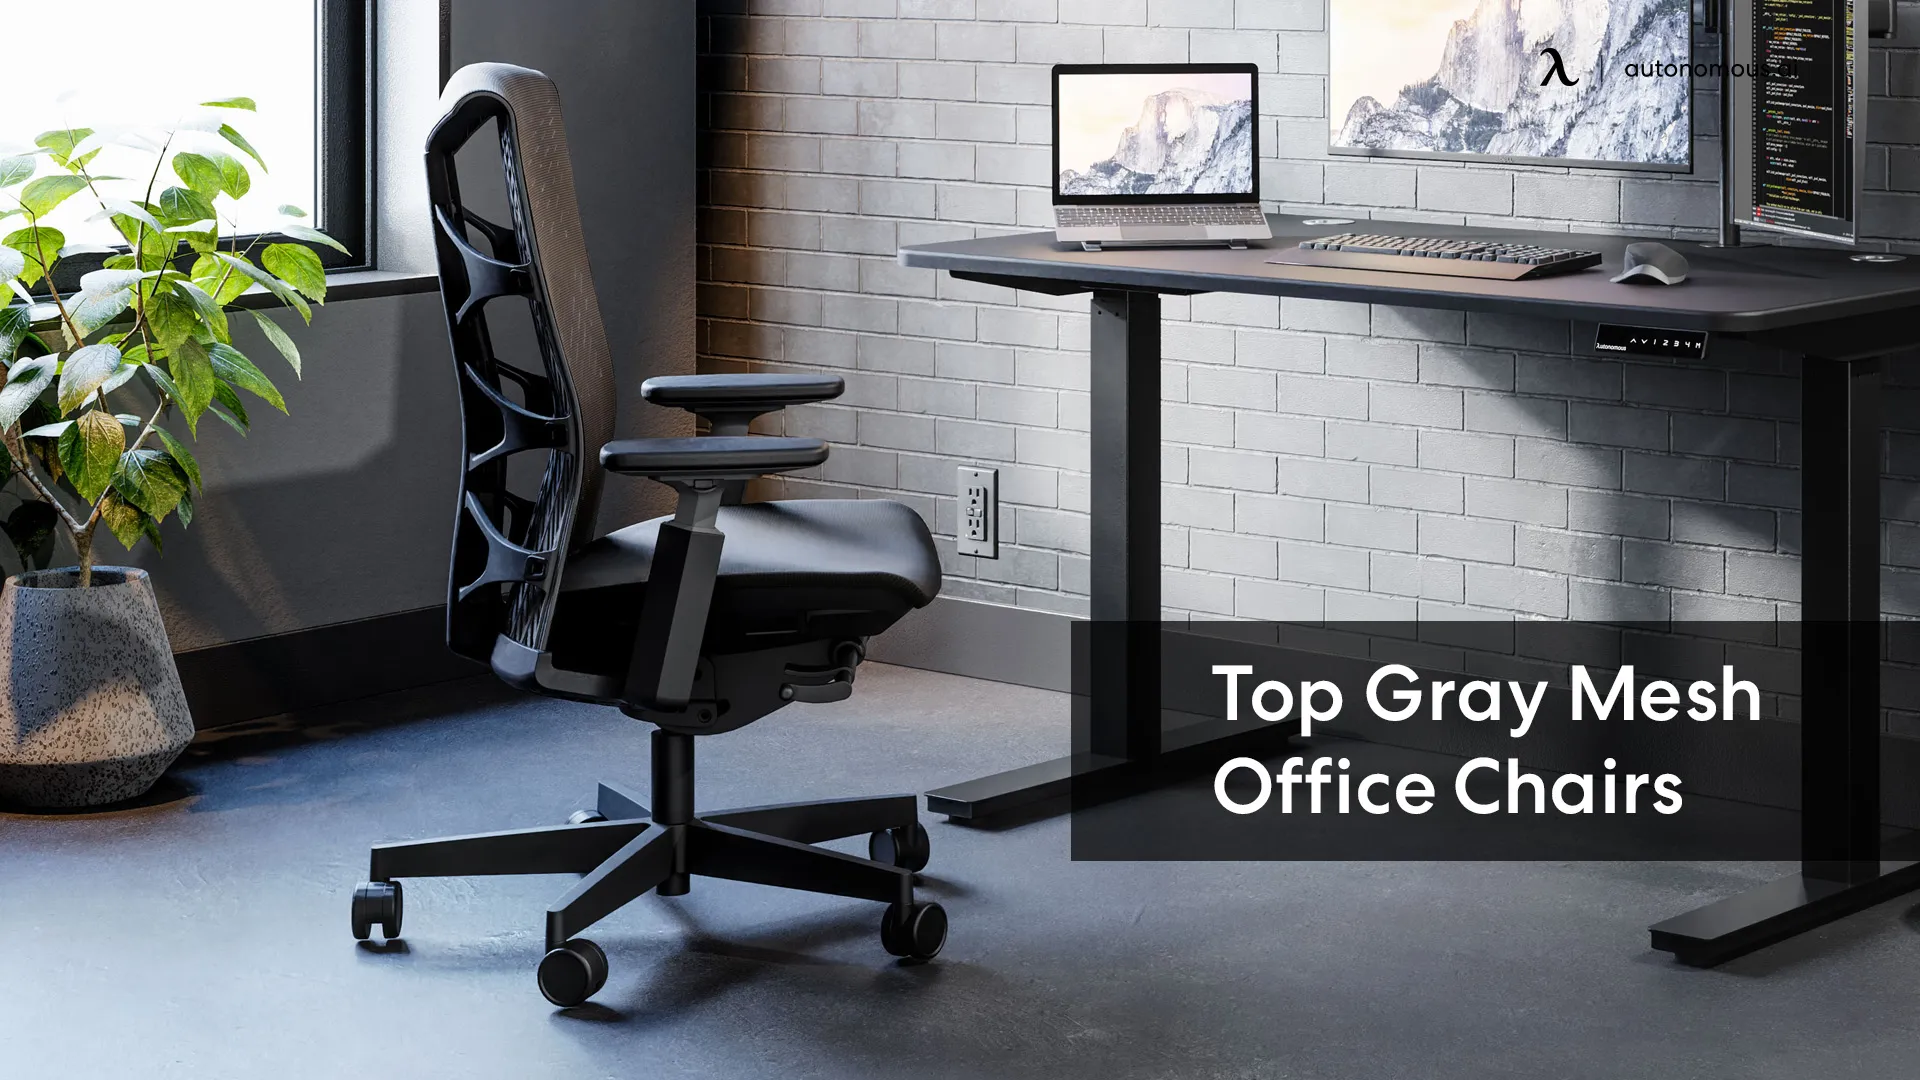 The Best Gray Mesh Office Chairs for Comfortable Seating